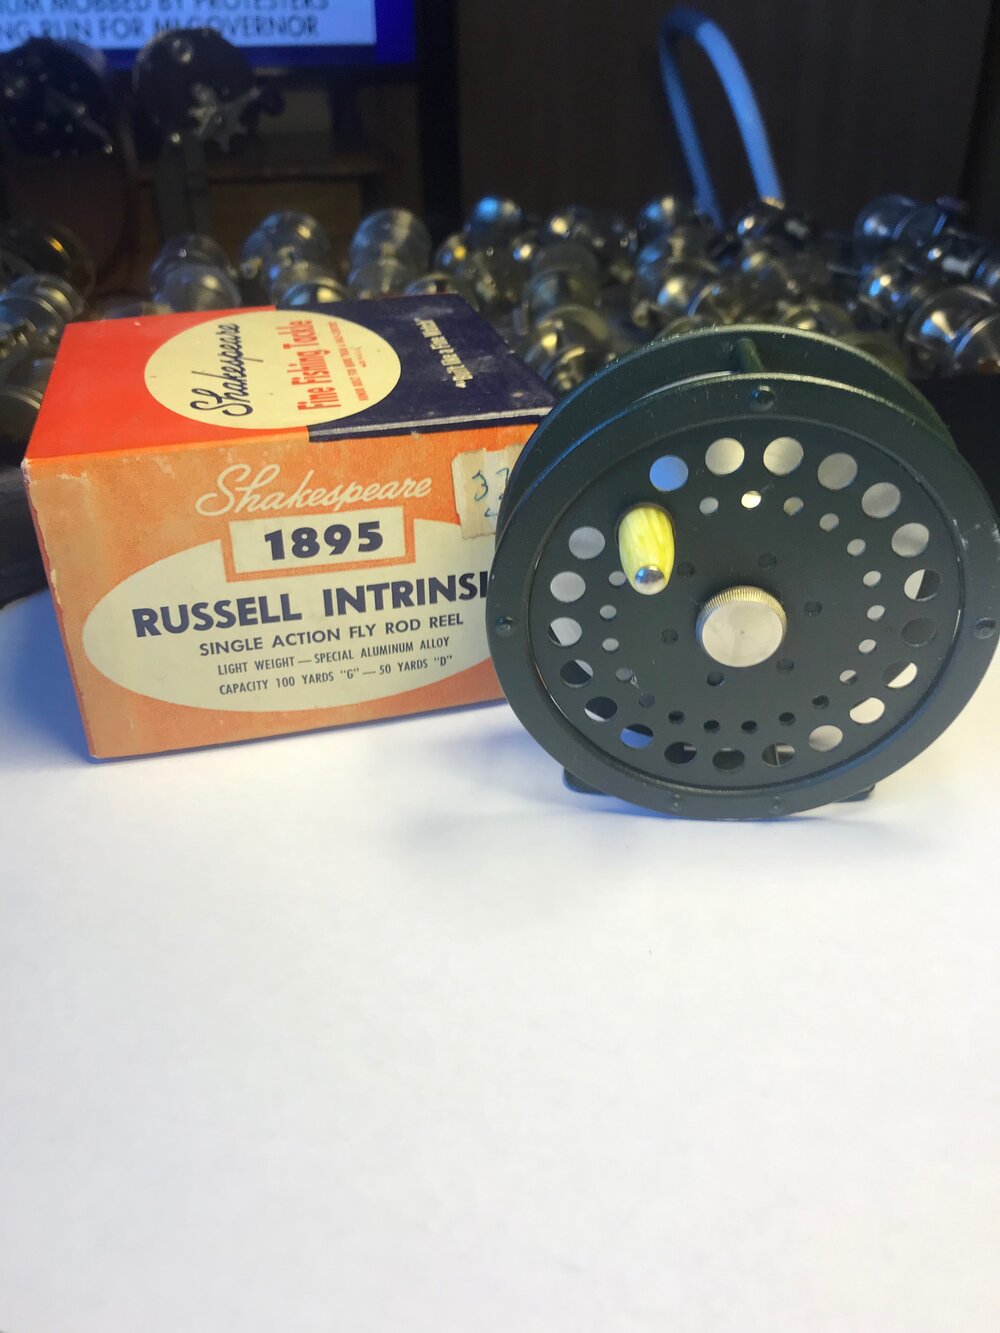 Shakespeare RUSSELL INTRINSIC No. 1895 Model GE Fly Reel with